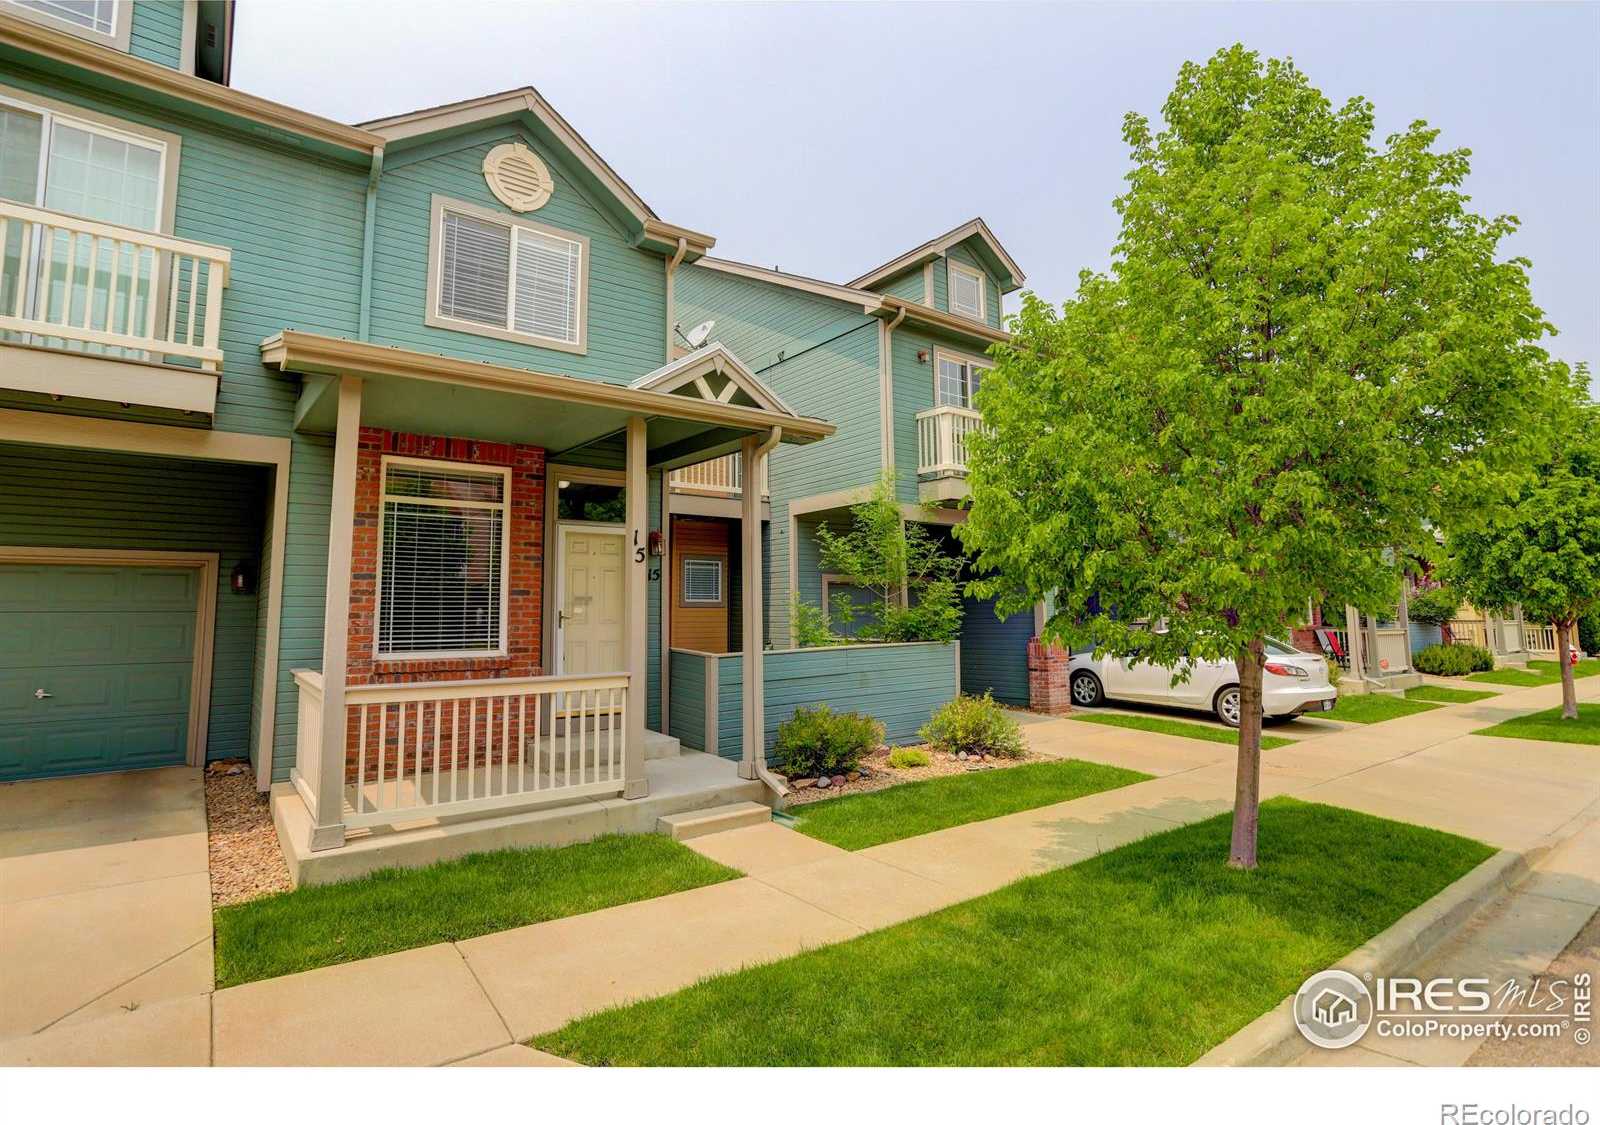 View Longmont, CO 80501 townhome